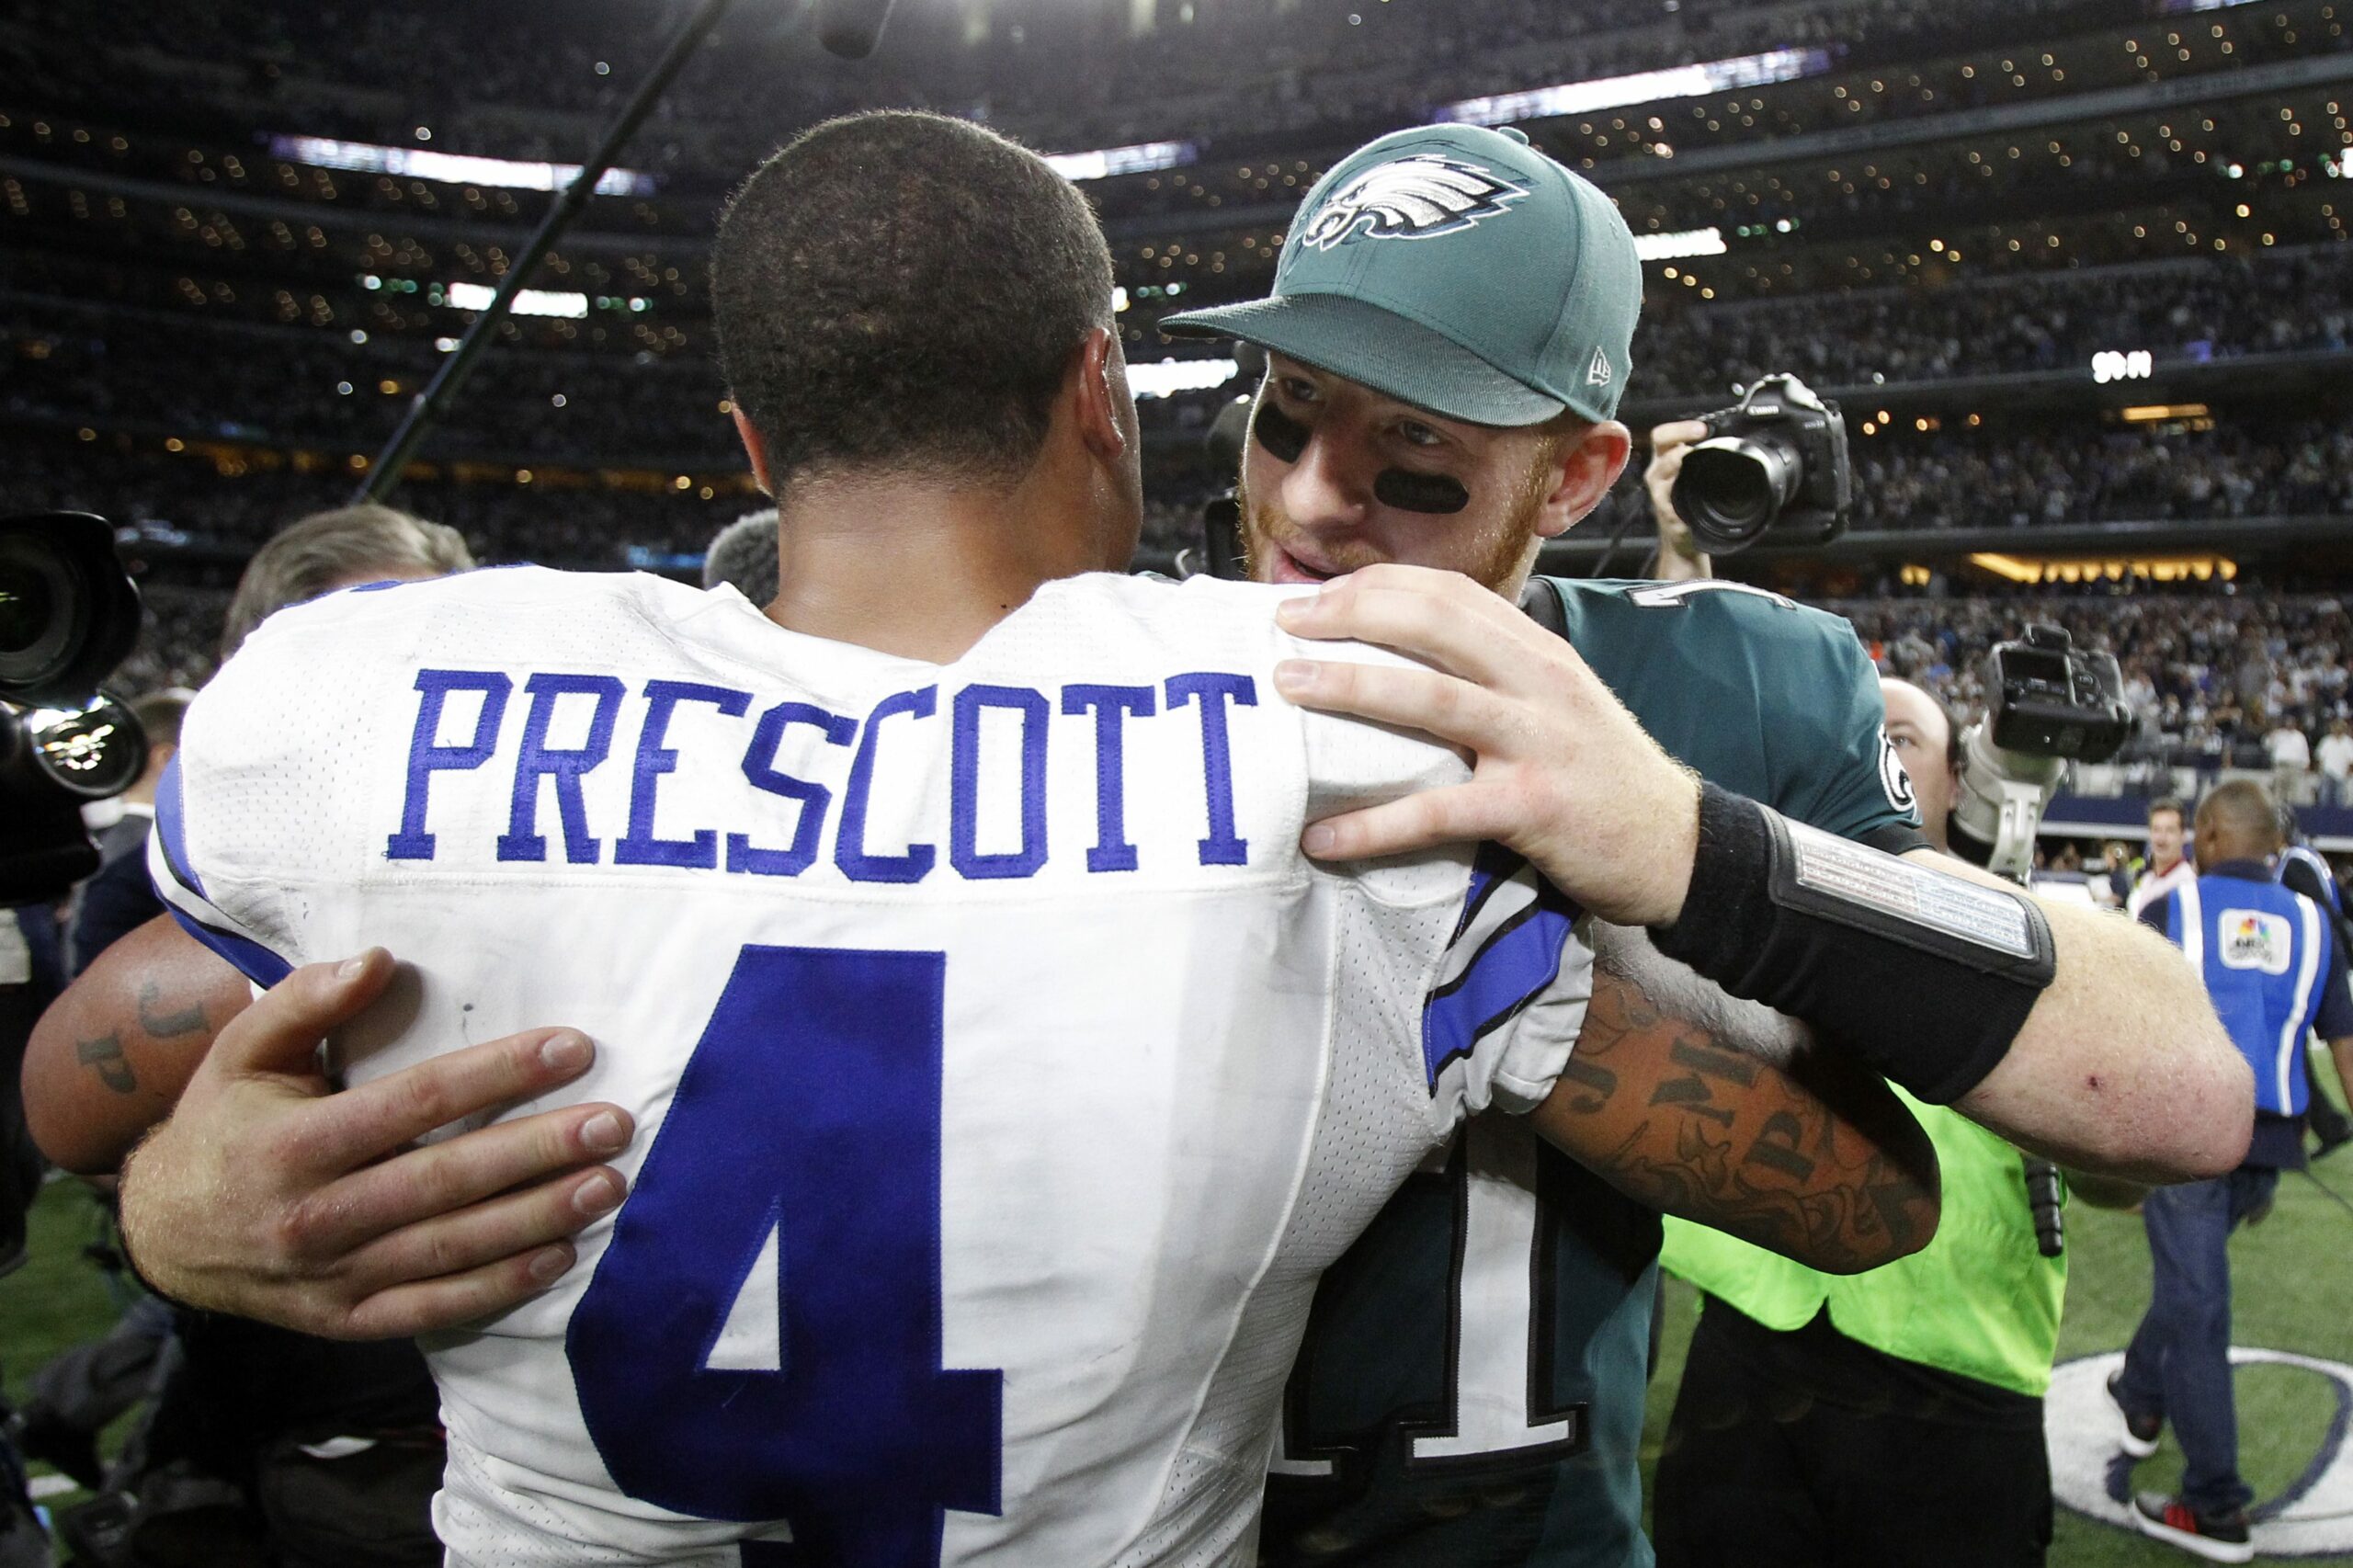 NFC East Ranked as Second Best QB Division